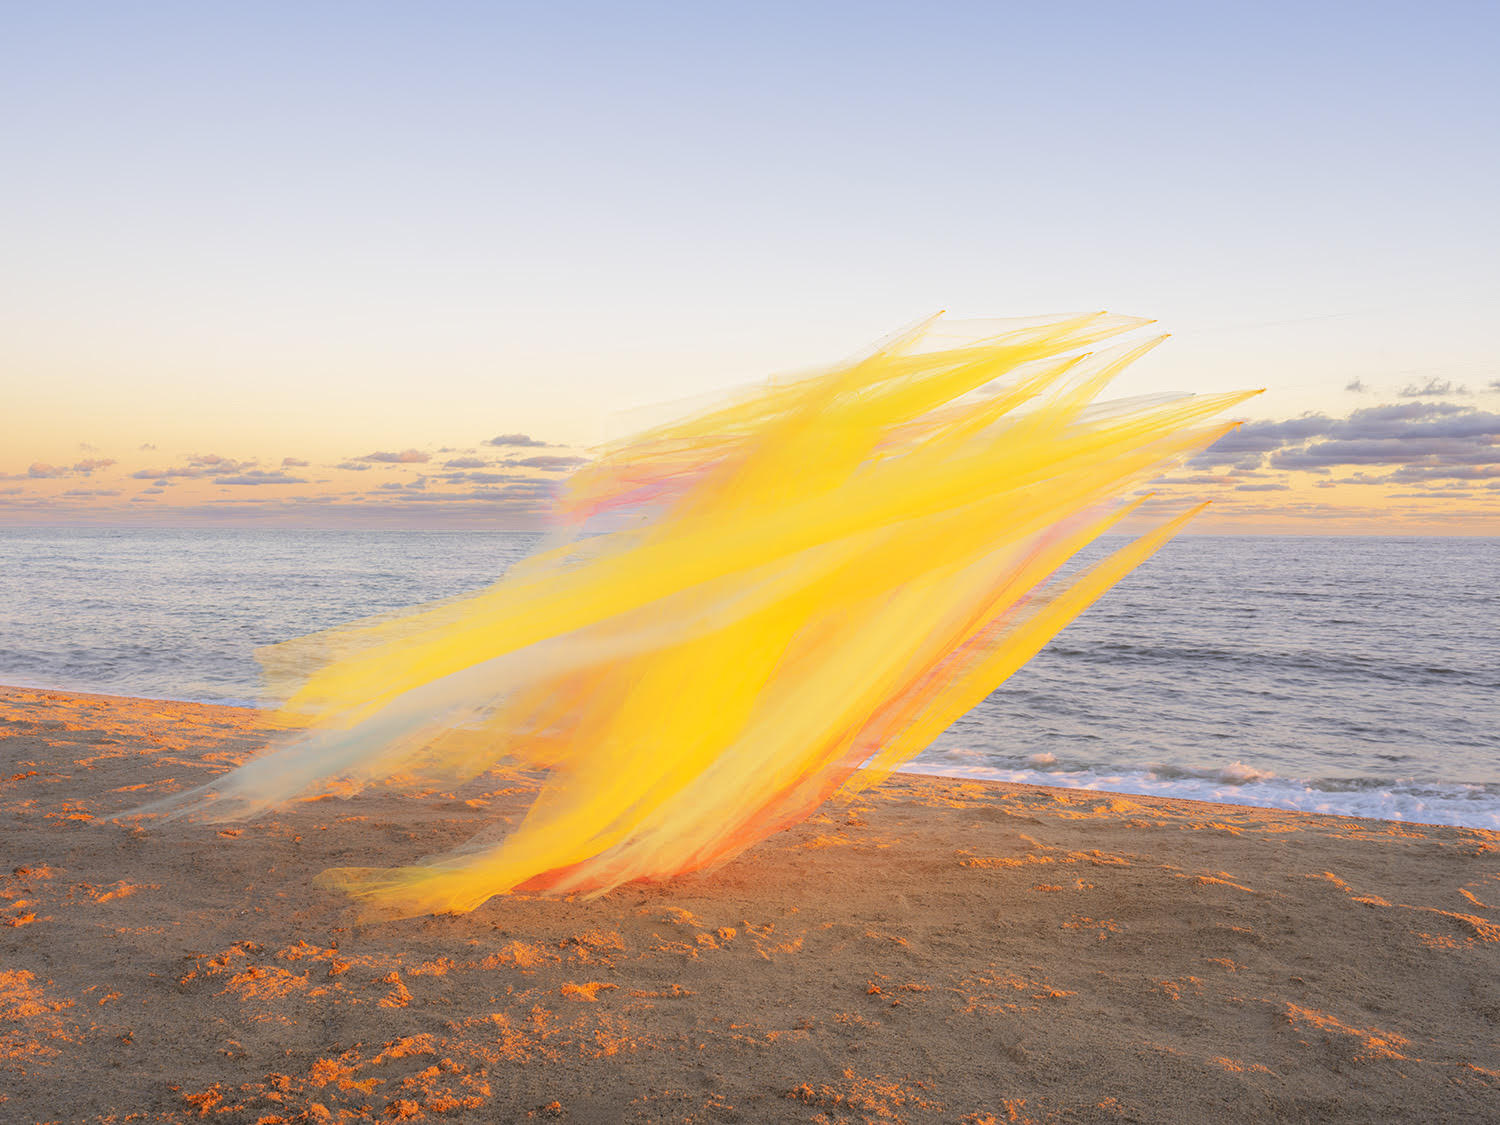 A photograph of a swathe of yellow tulle floating in the wind on a beach.